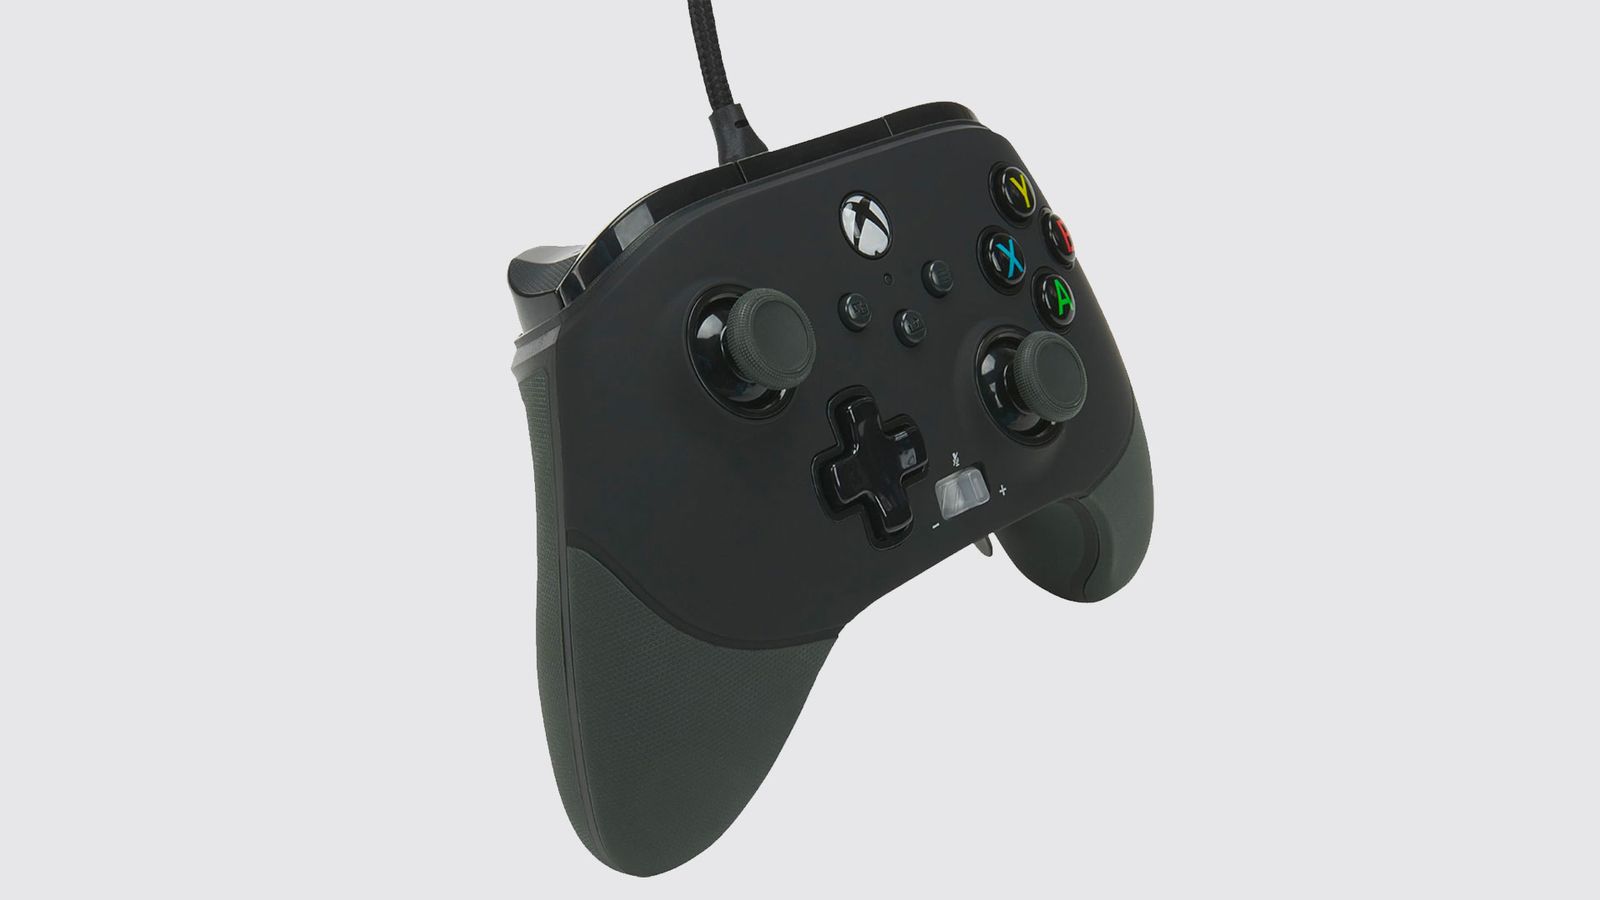 PowerA FUSION Pro 2 product image of a black, Xbox-style, wired controller.